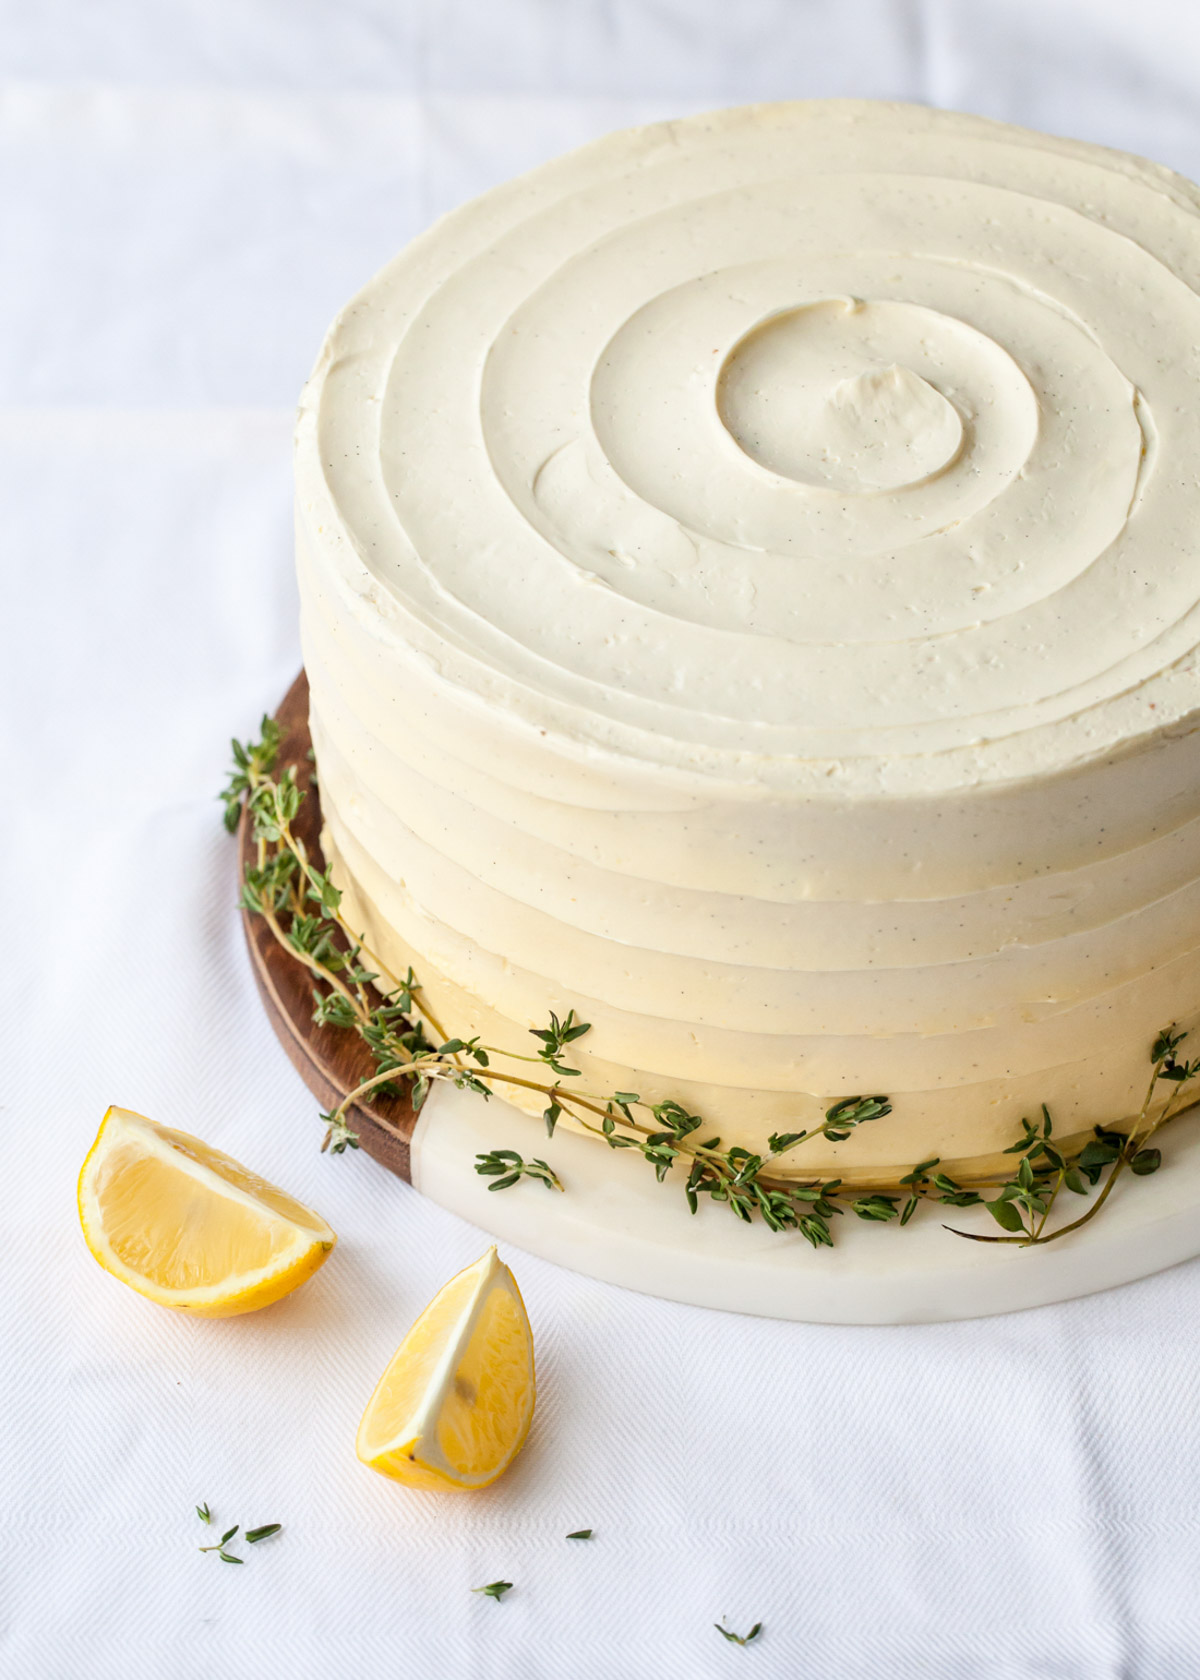 Lemon thyme cake with swirled yellow buttercream frosting and fresh thyme